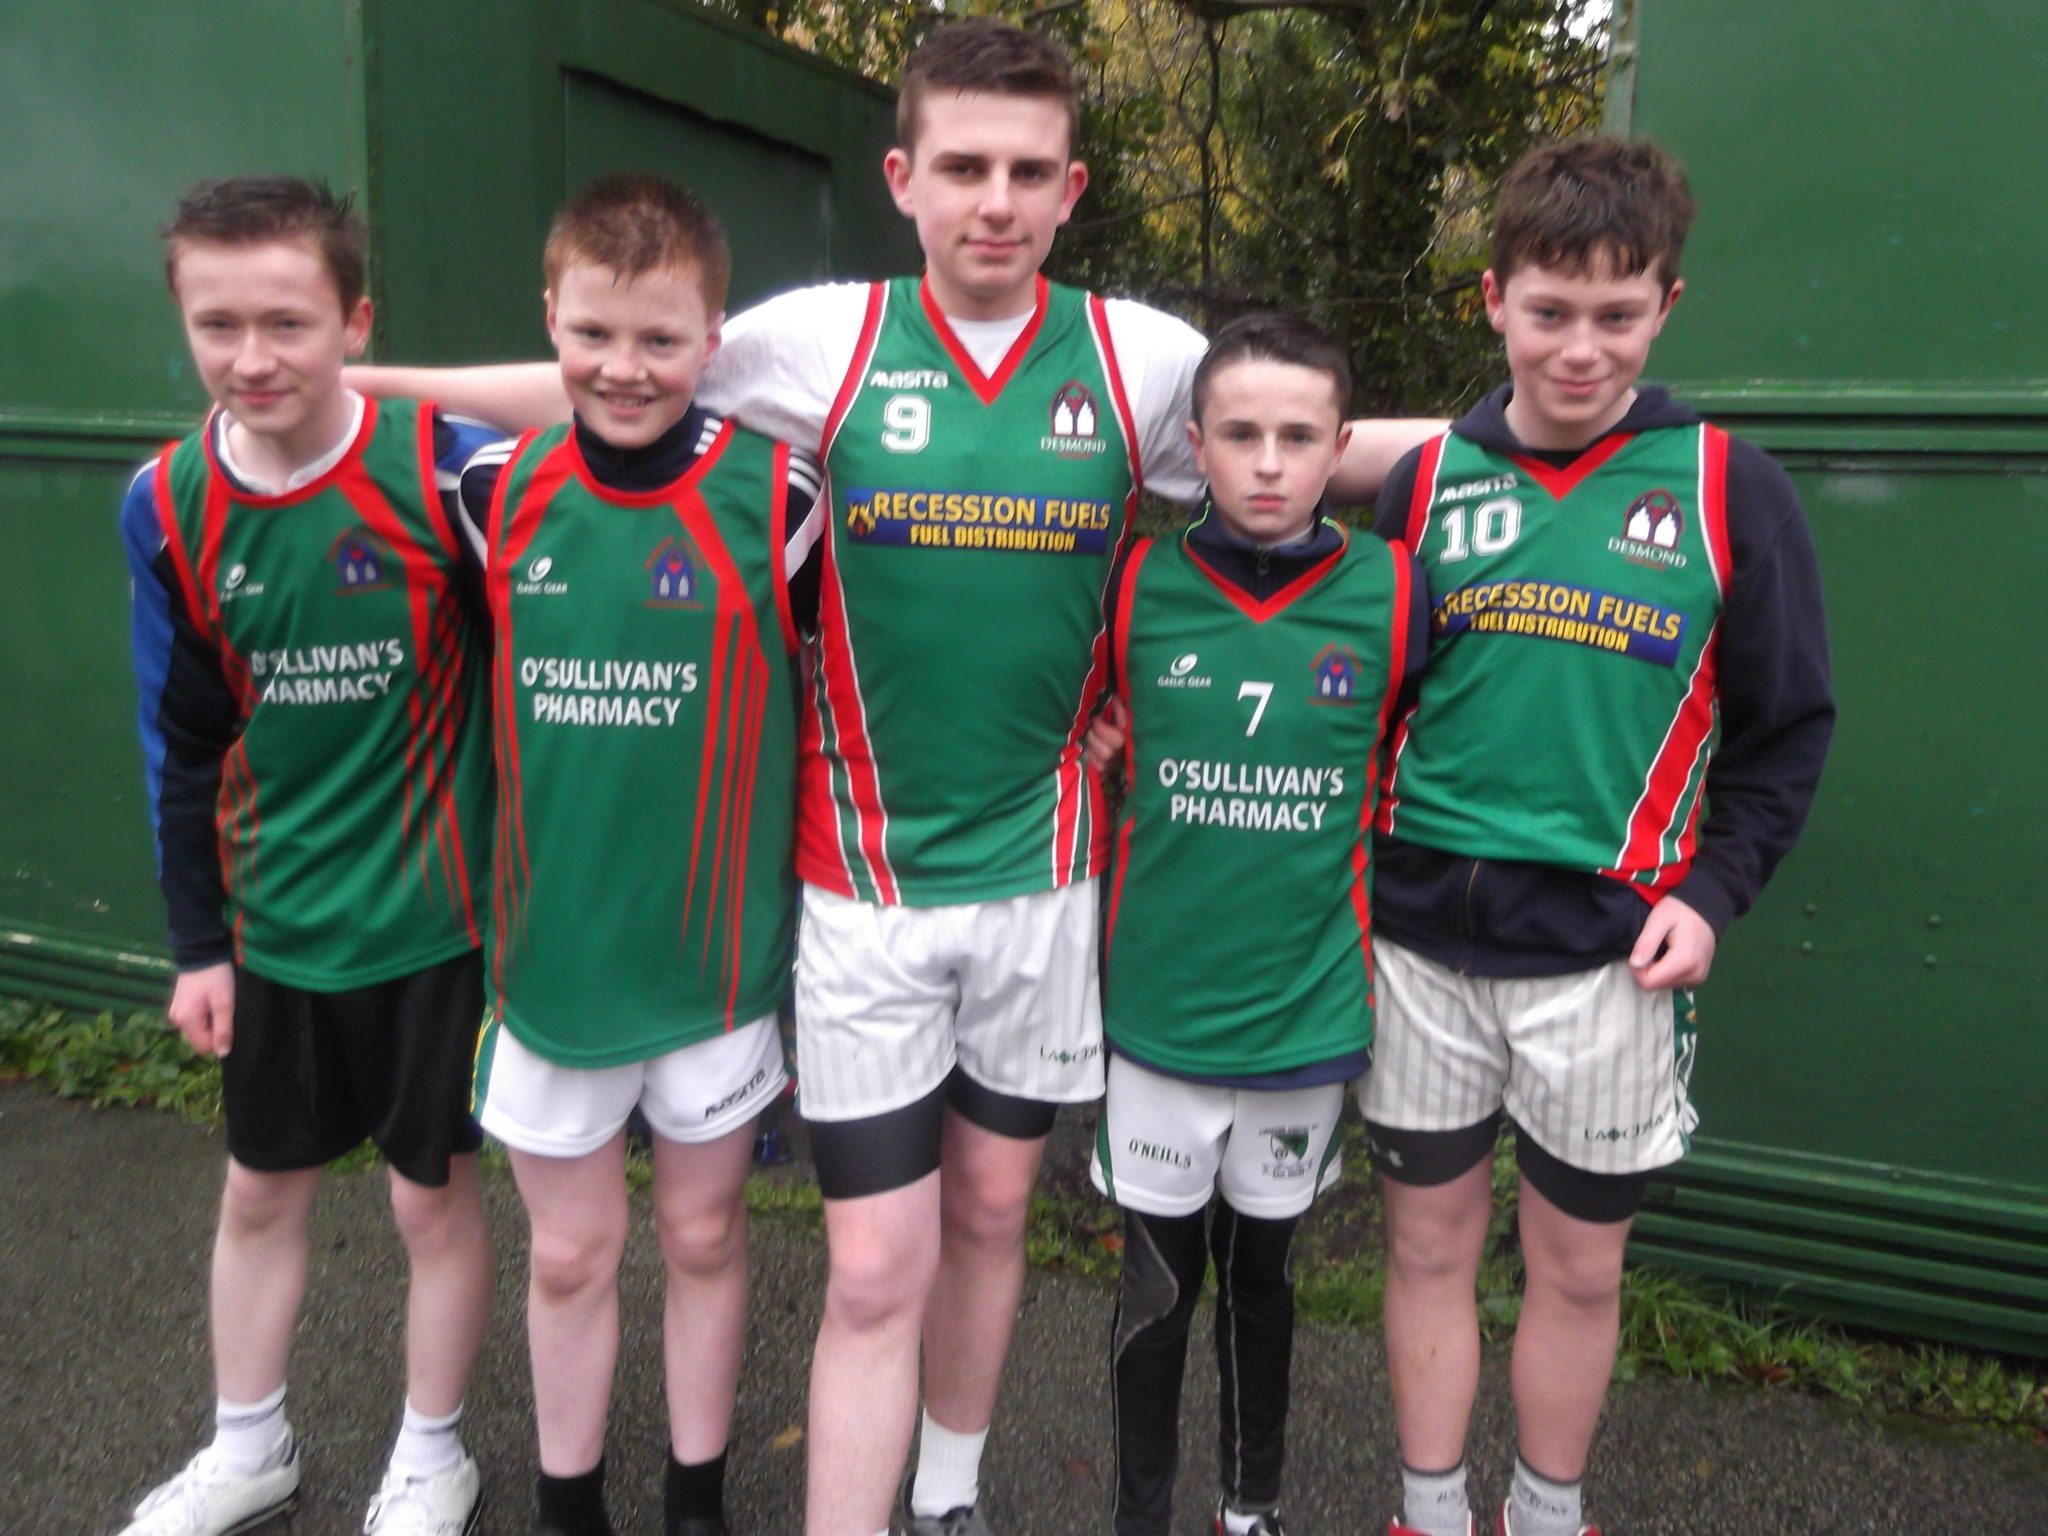 2015 November: Desmond College Success at the LCETB Cross Country Games